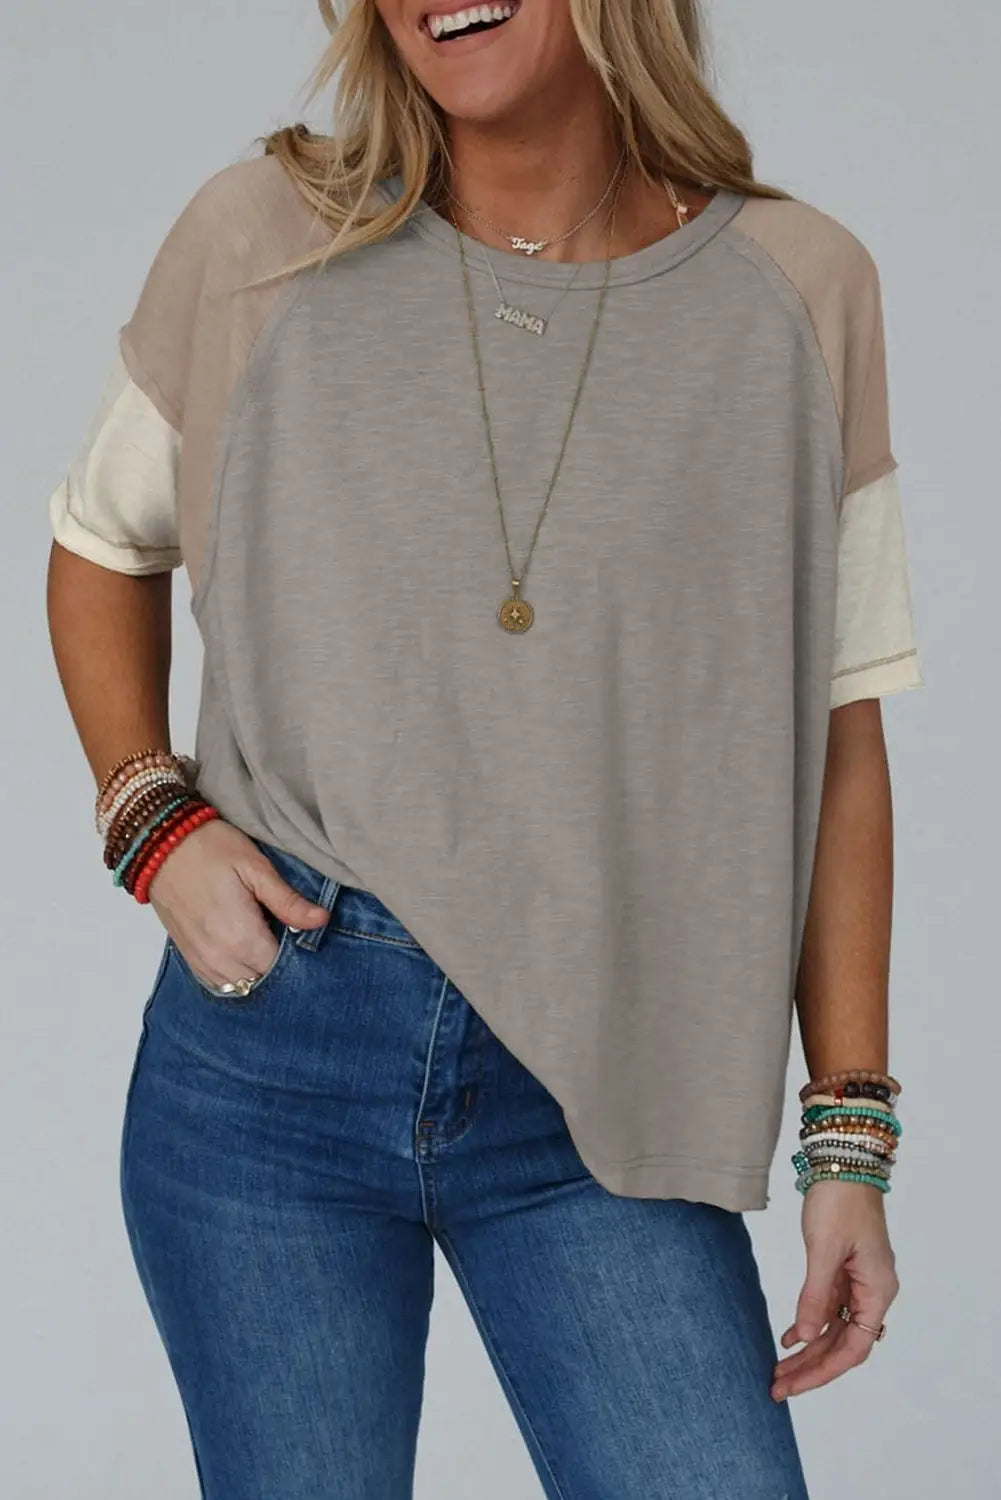 Simply taupe exposed seam loose tee - s / 65% polyester + 35% cotton - tops/tops & tees